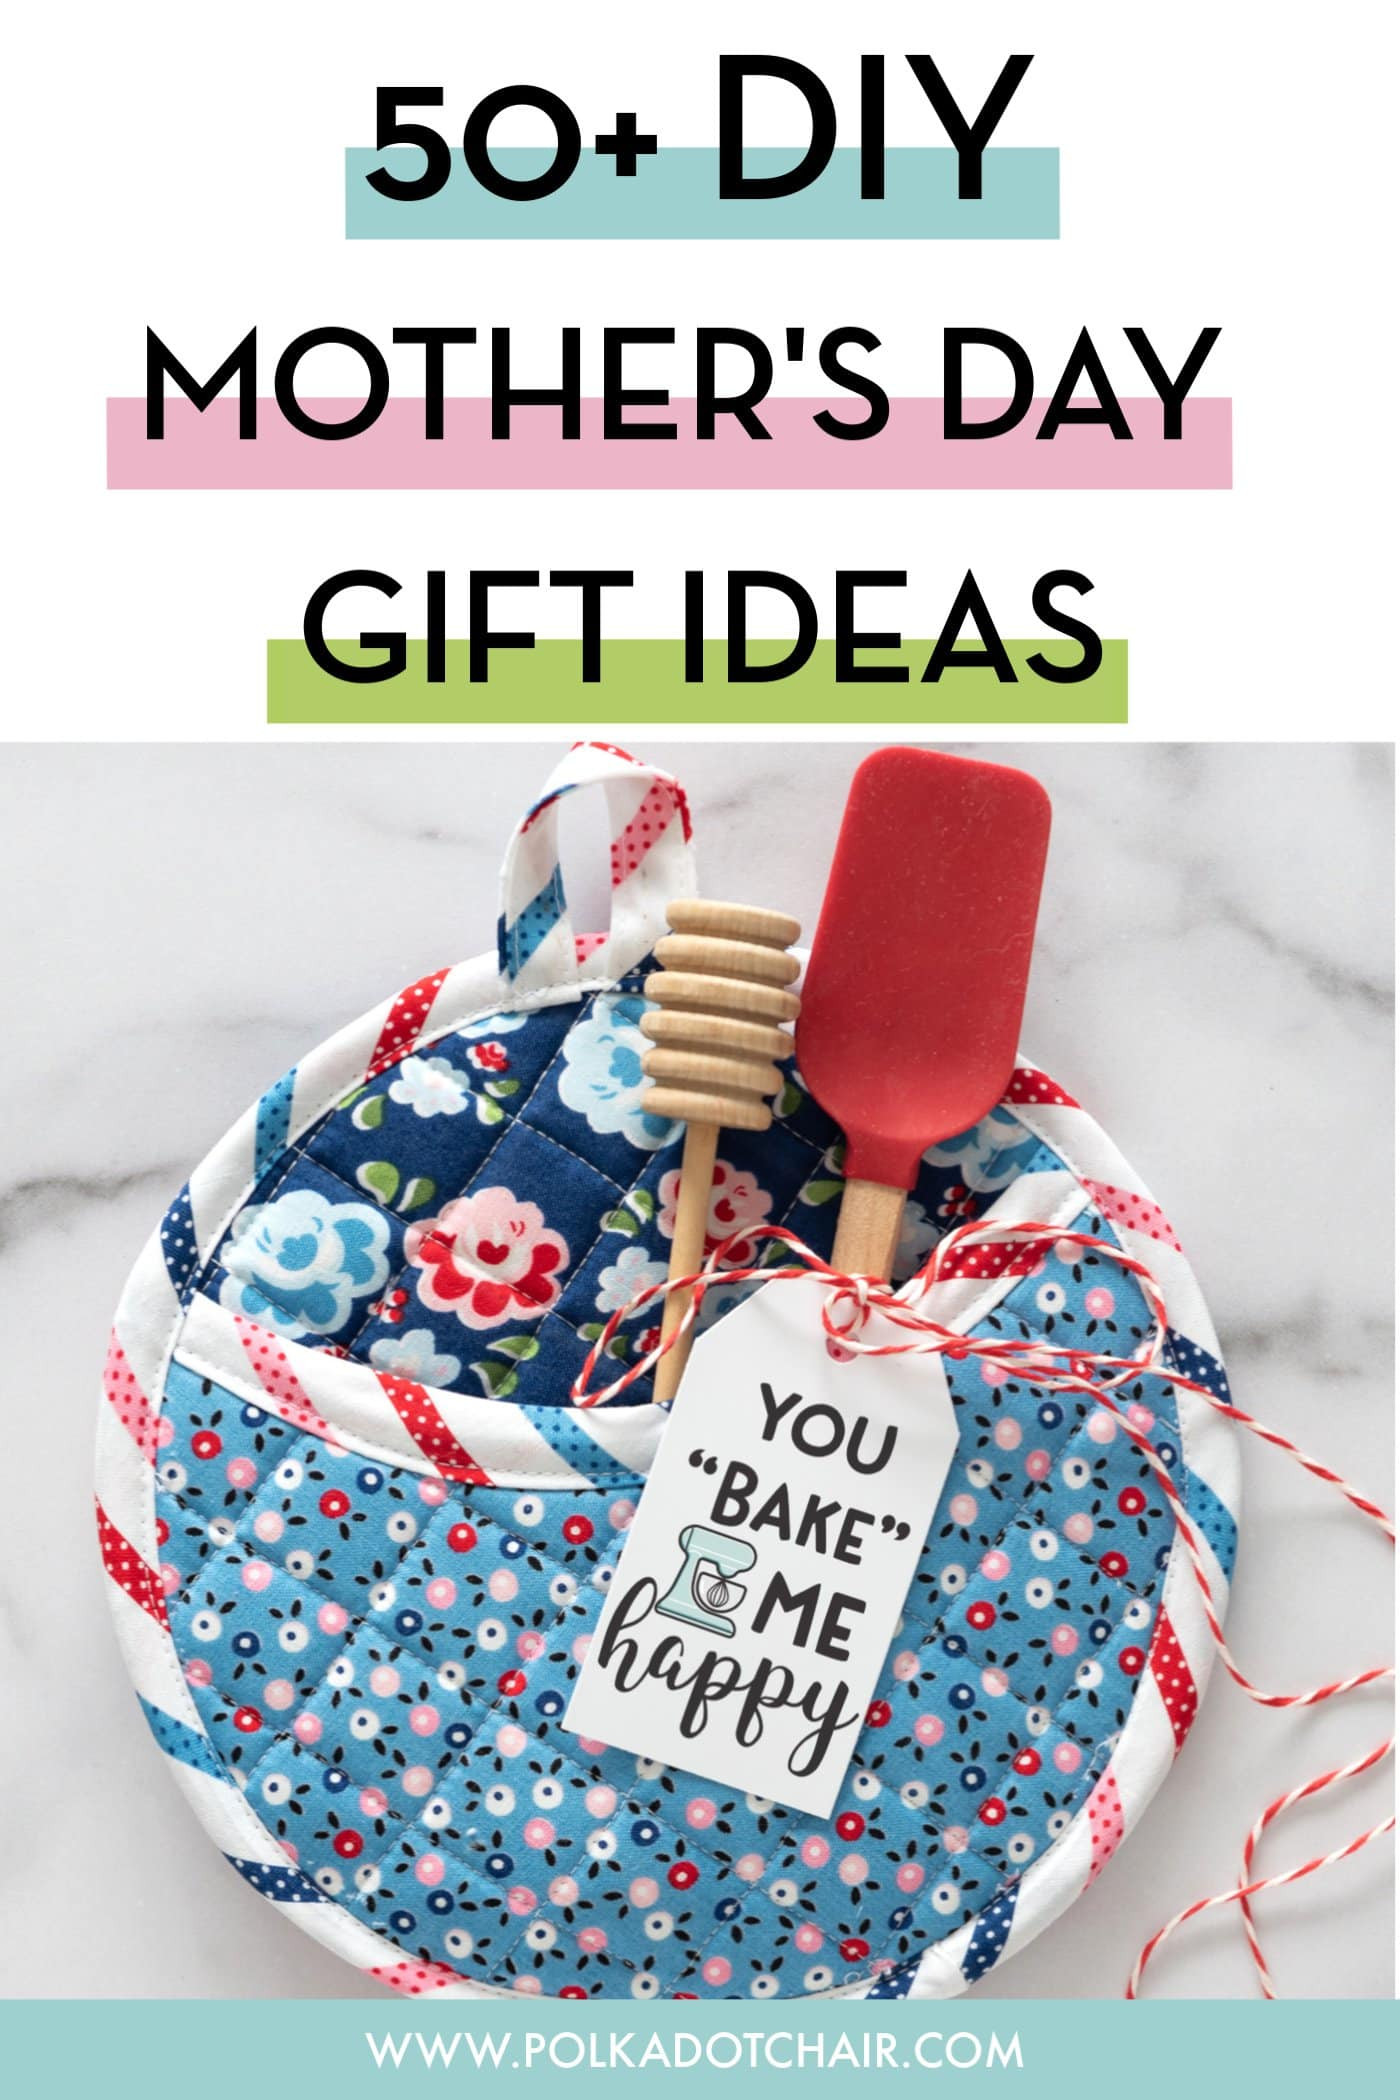 Mothers Day Gift Ideas Pinterest
 50 DIY Mother s Day Gift Ideas & Projects